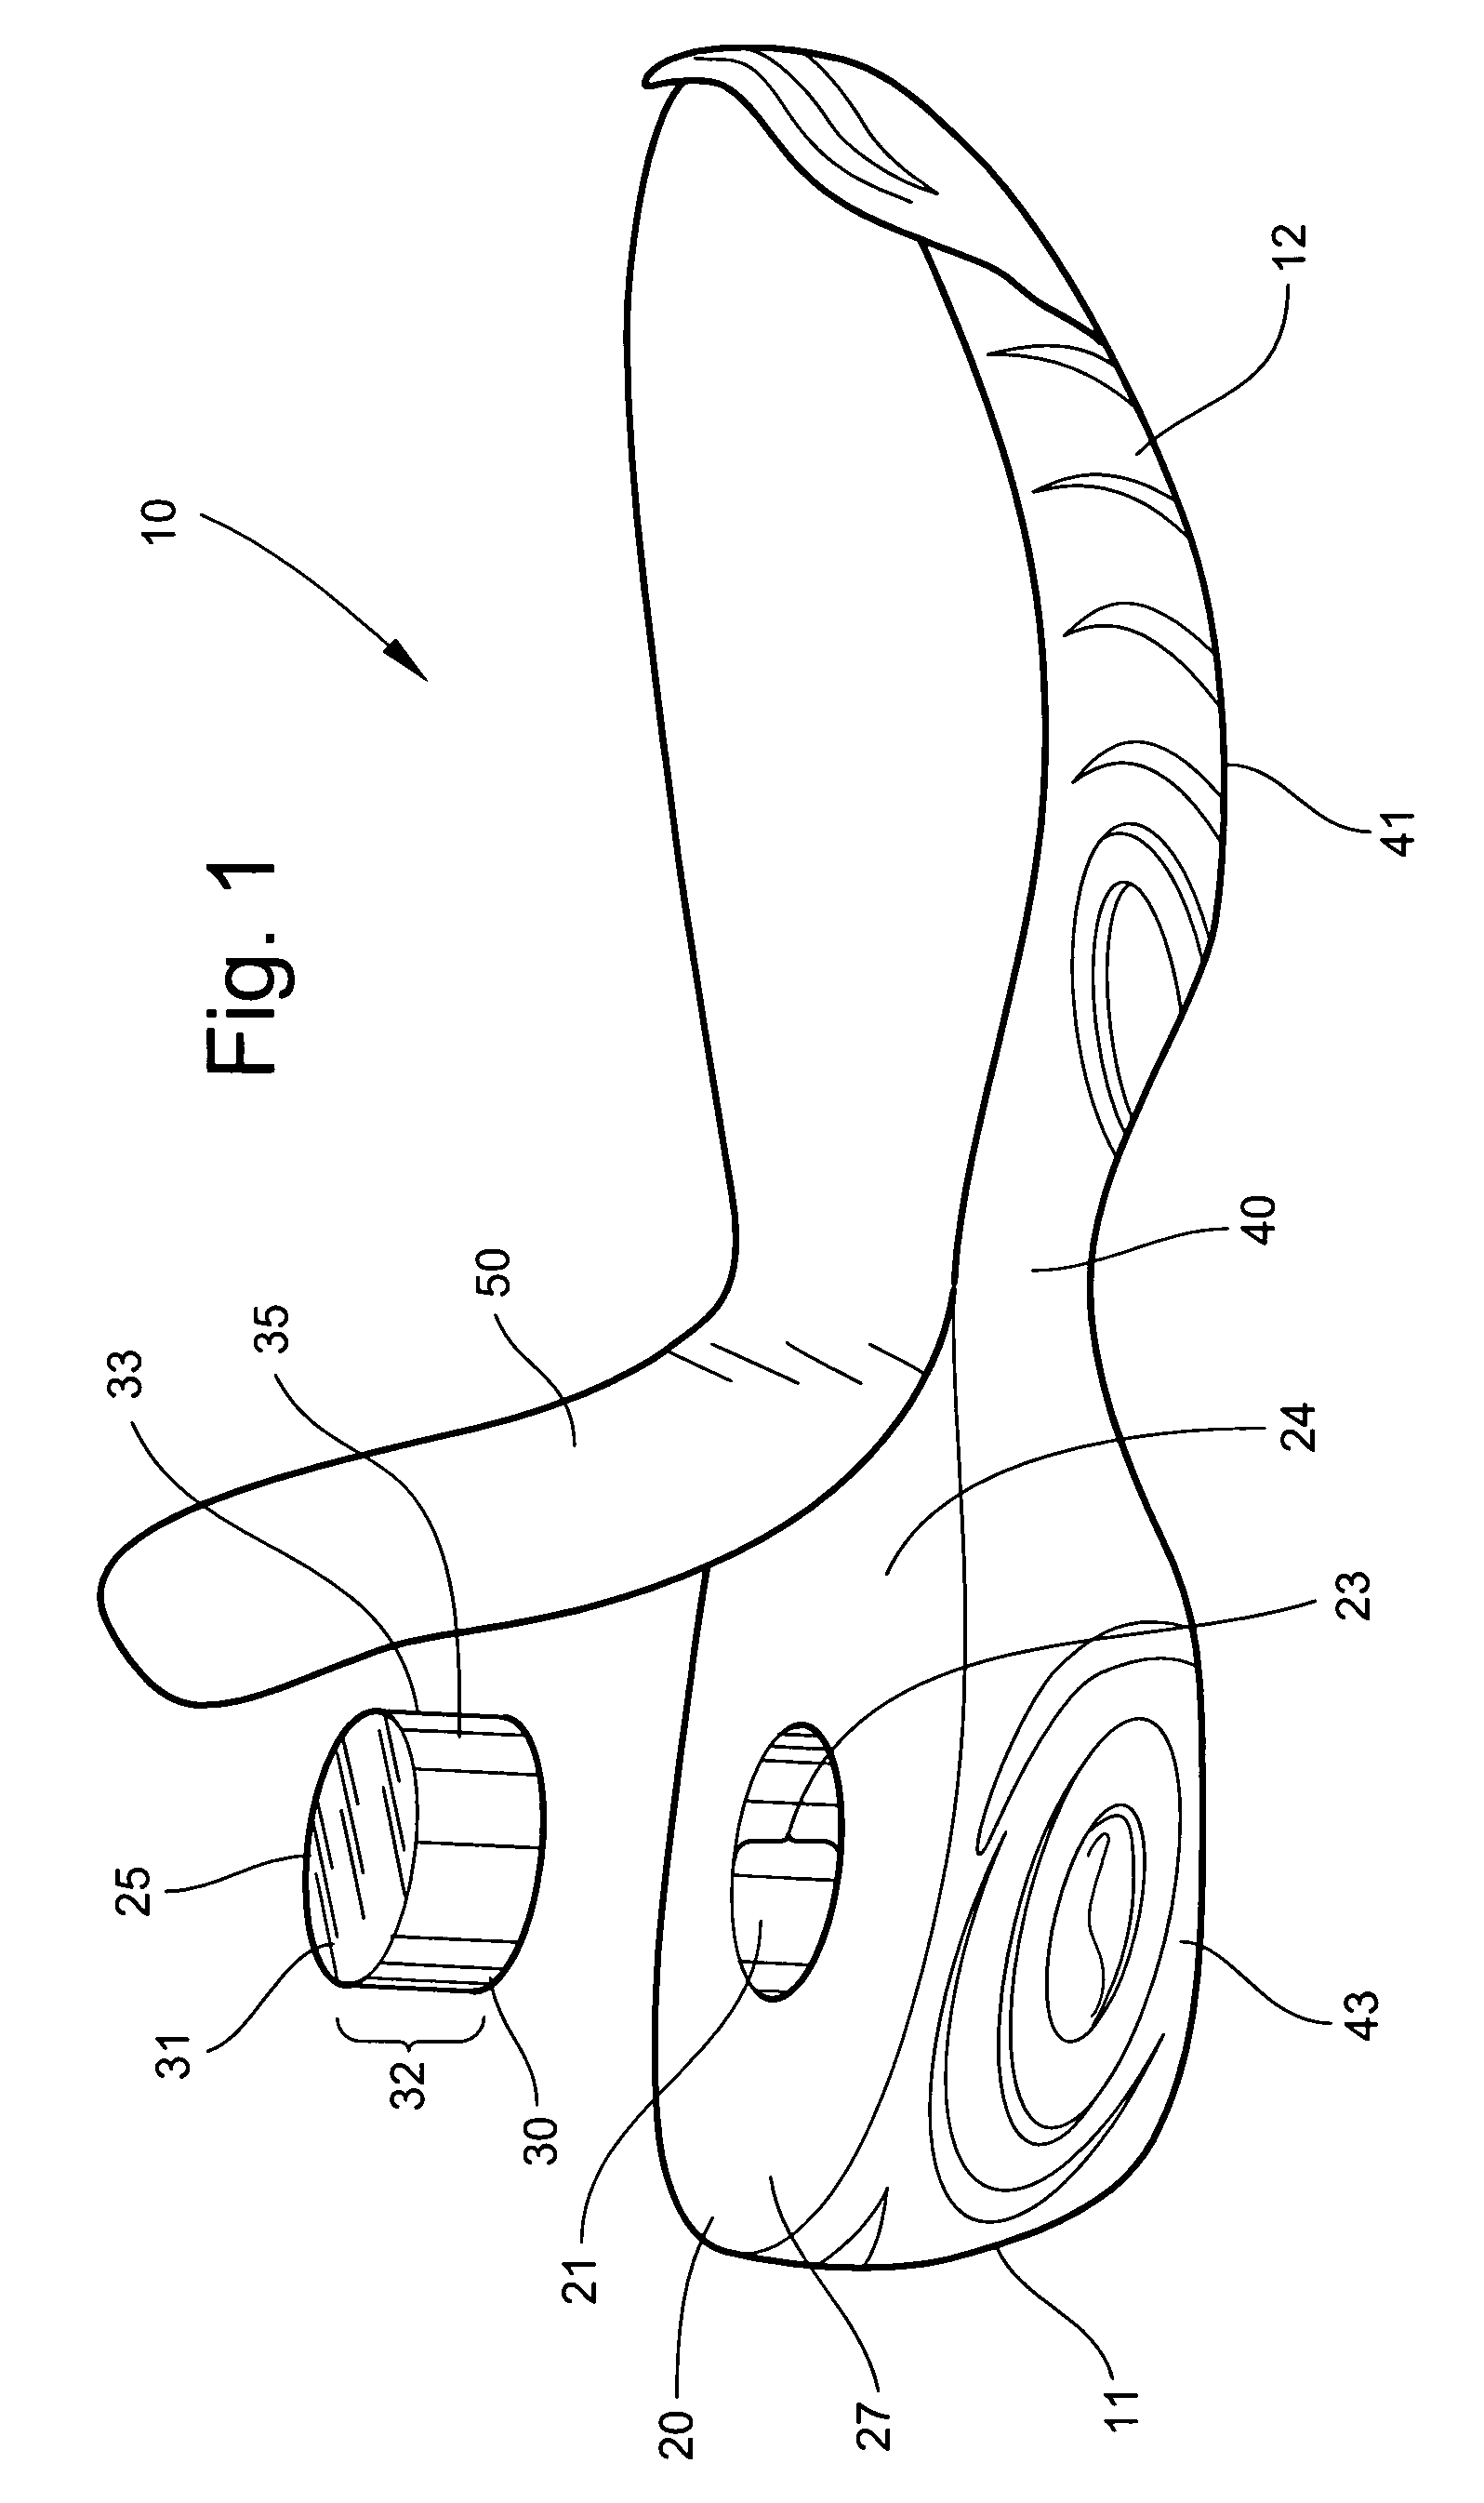 Footwear with display element